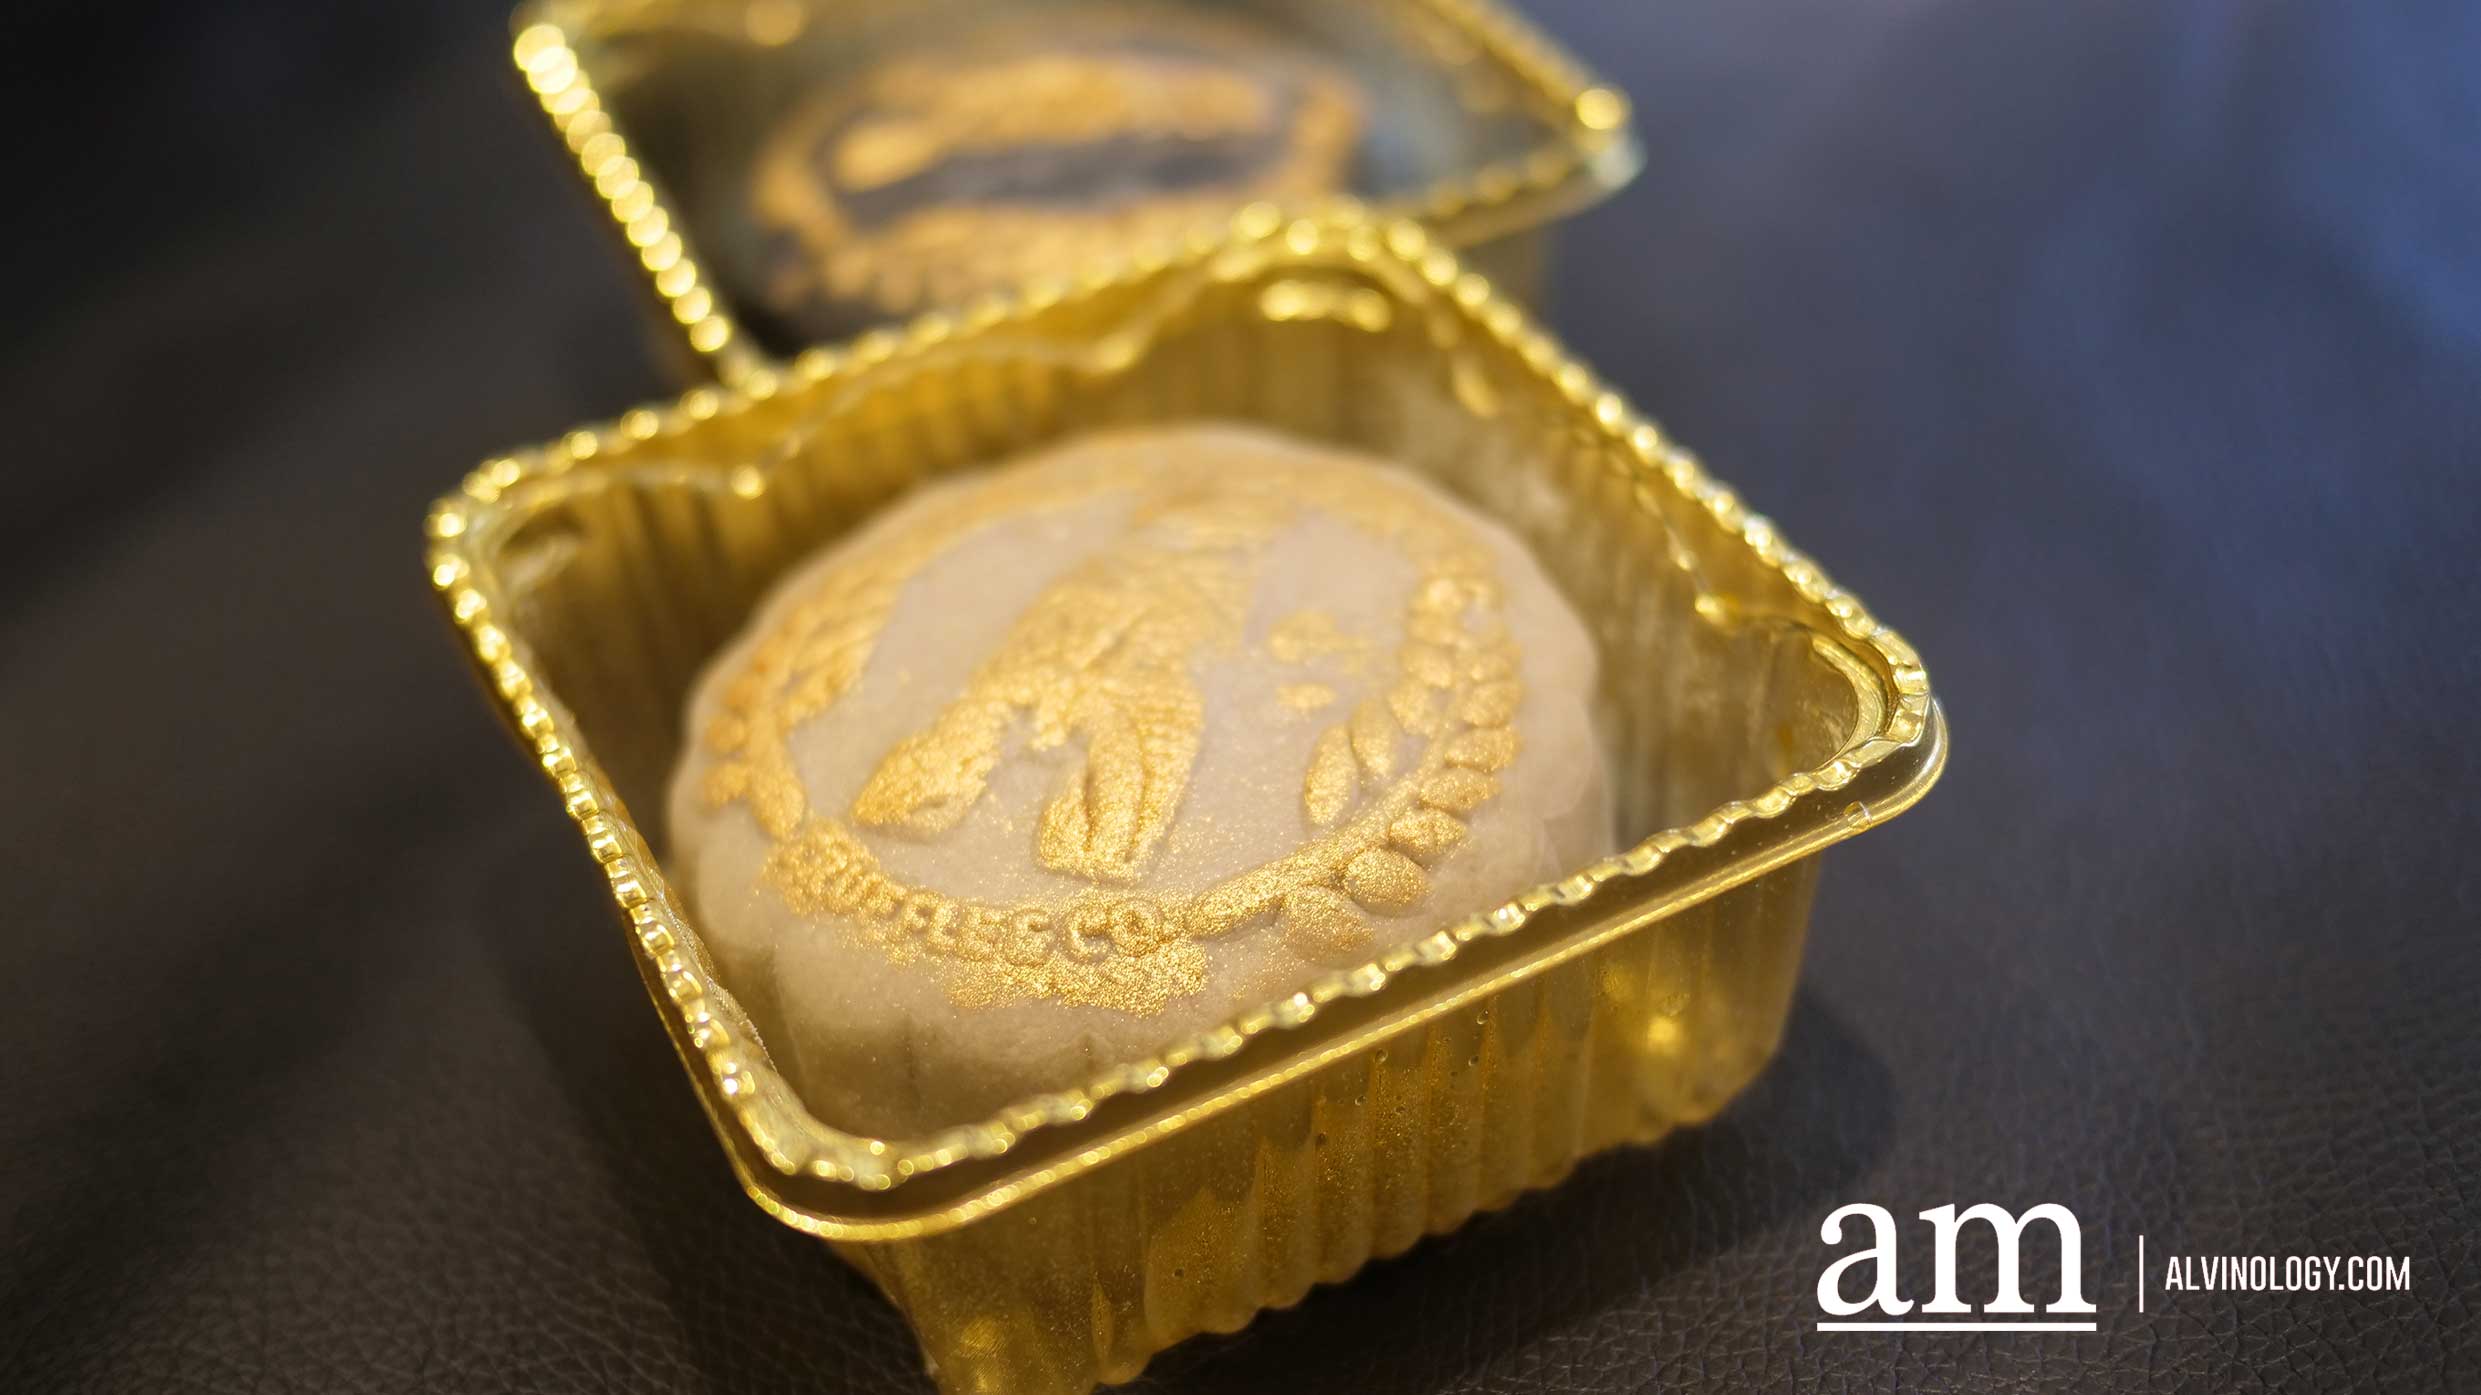 All the Fun and Unique Mooncakes for the Mid-Autumn Festival in Singapore - Alvinology